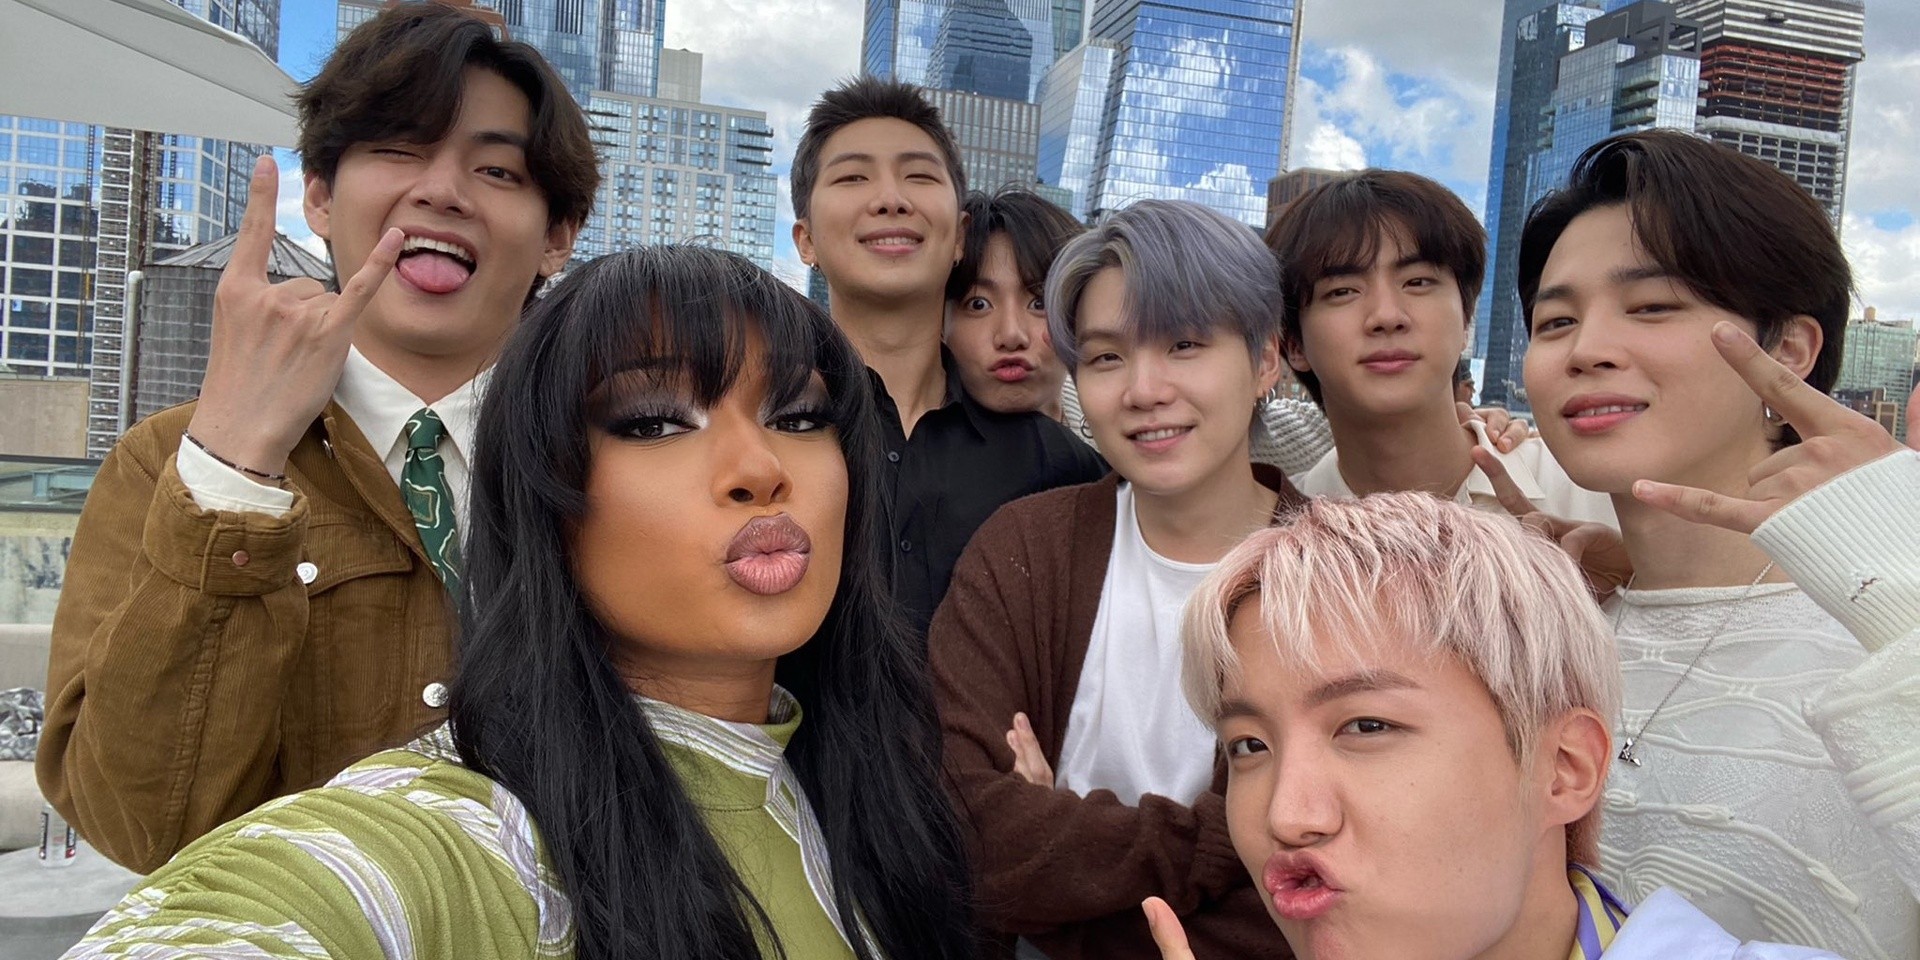 BTS and Megan Thee Stallion to perform 'Butter' remix at the 2021 American Music Awards